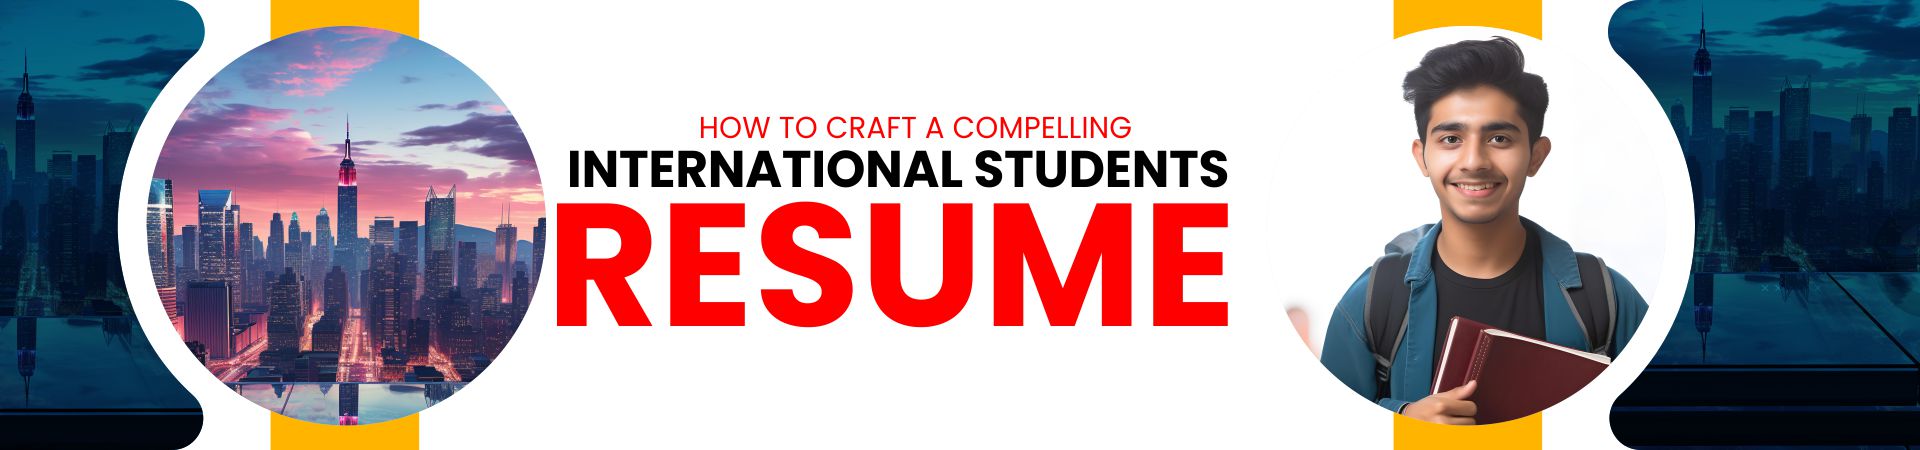 How to Craft a Compelling International Students Resume